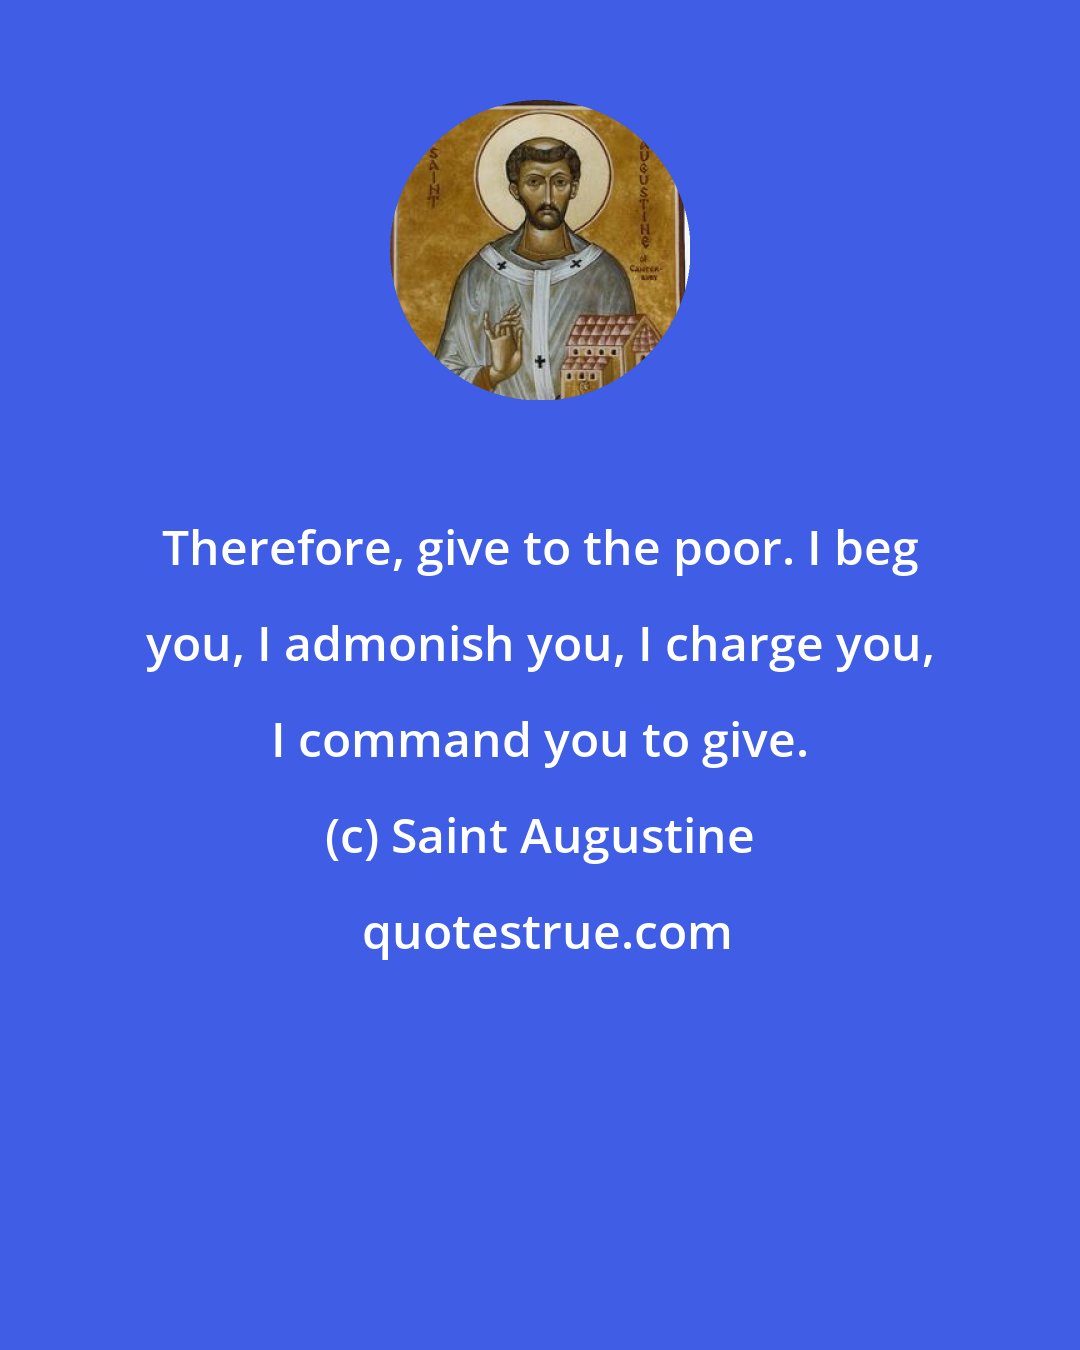 Saint Augustine: Therefore, give to the poor. I beg you, I admonish you, I charge you, I command you to give.